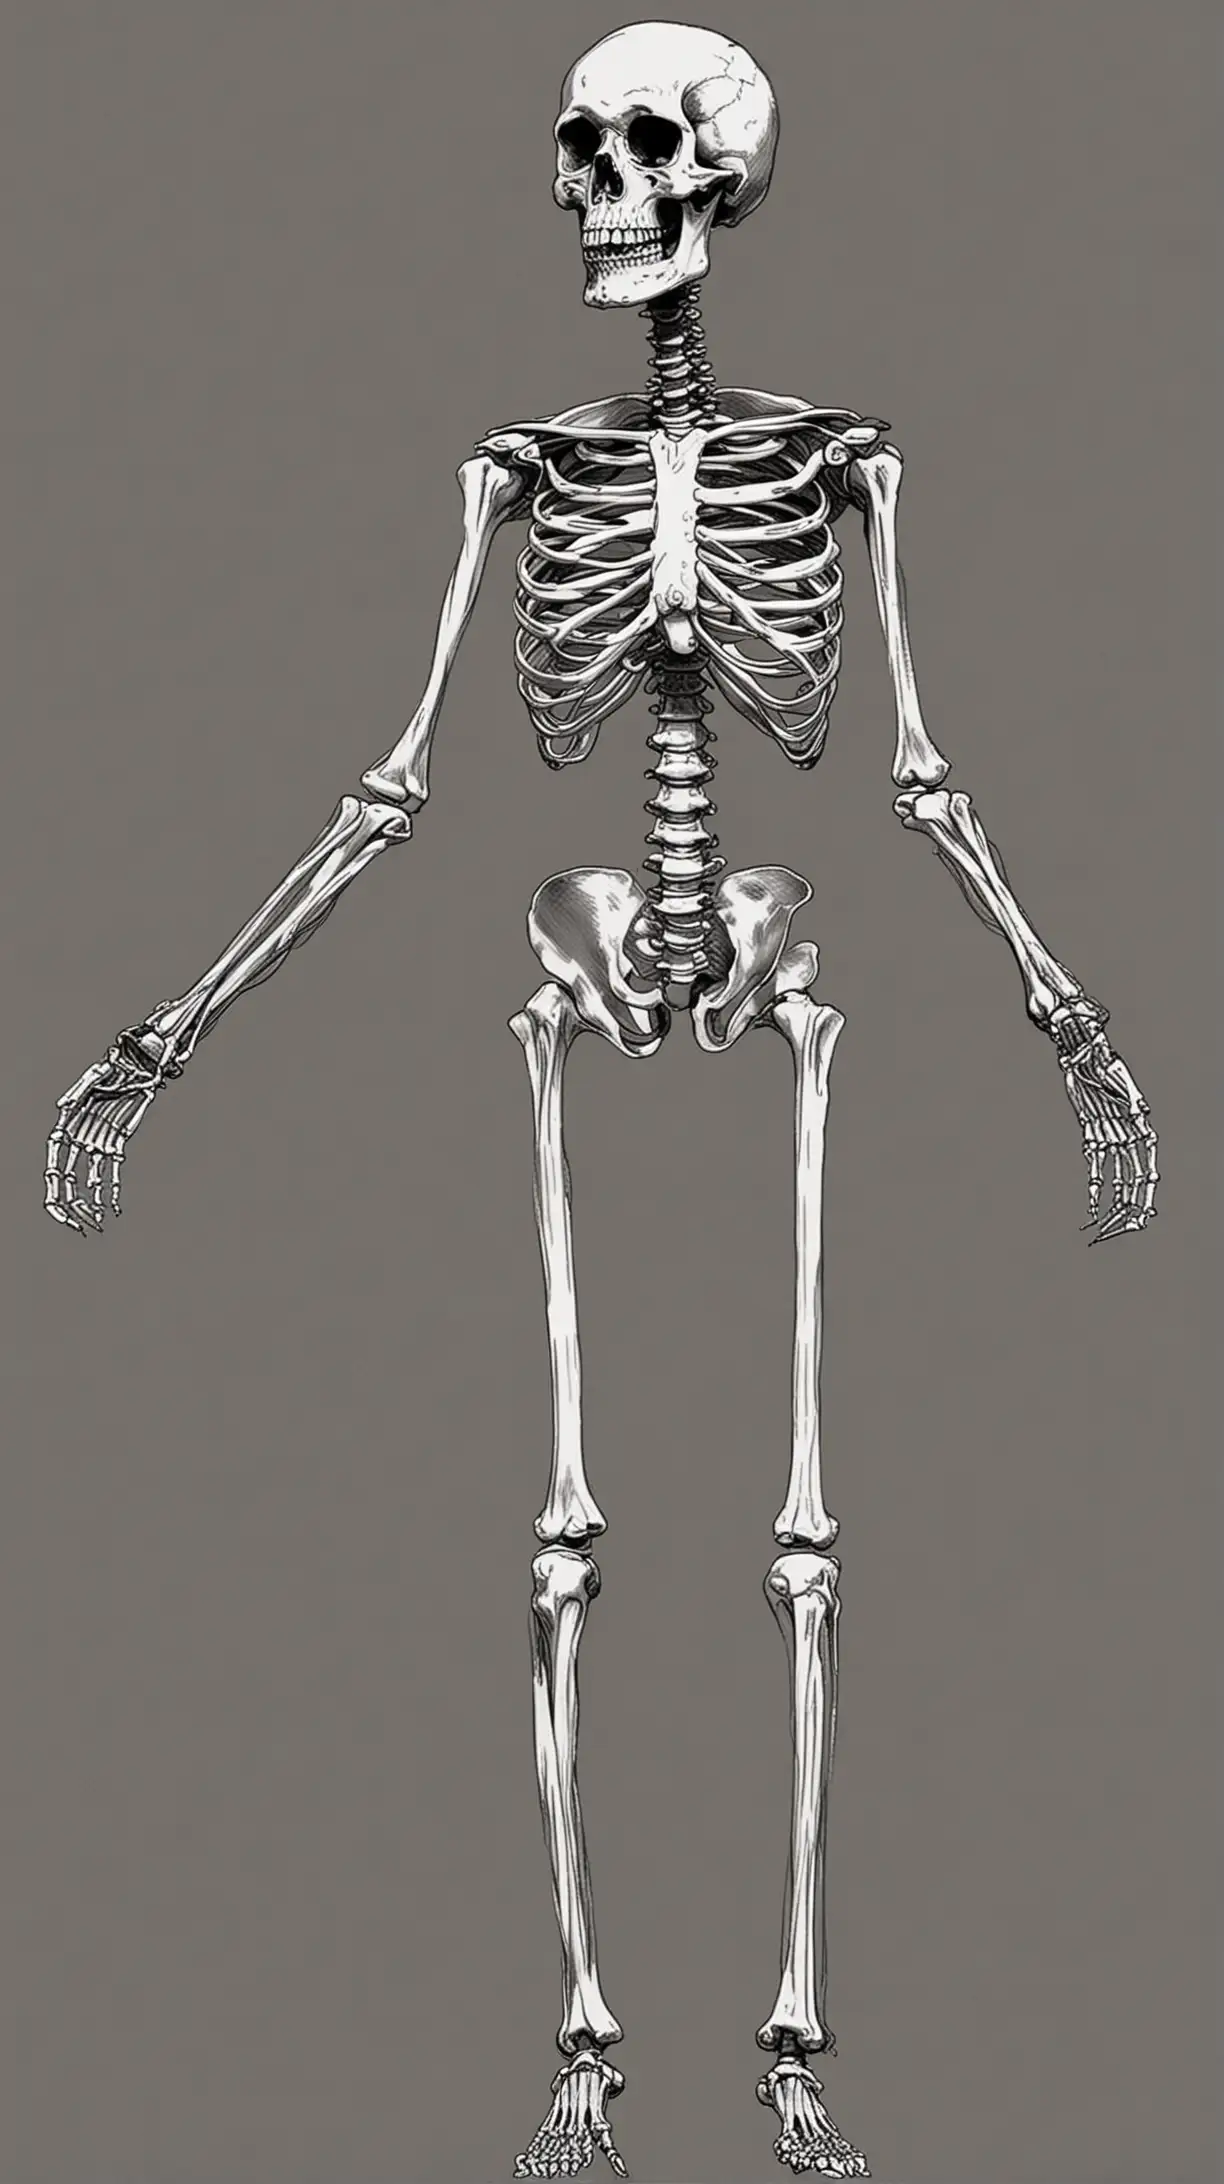 Skeleton with Bent Arms Clipart for Halloween Decorations